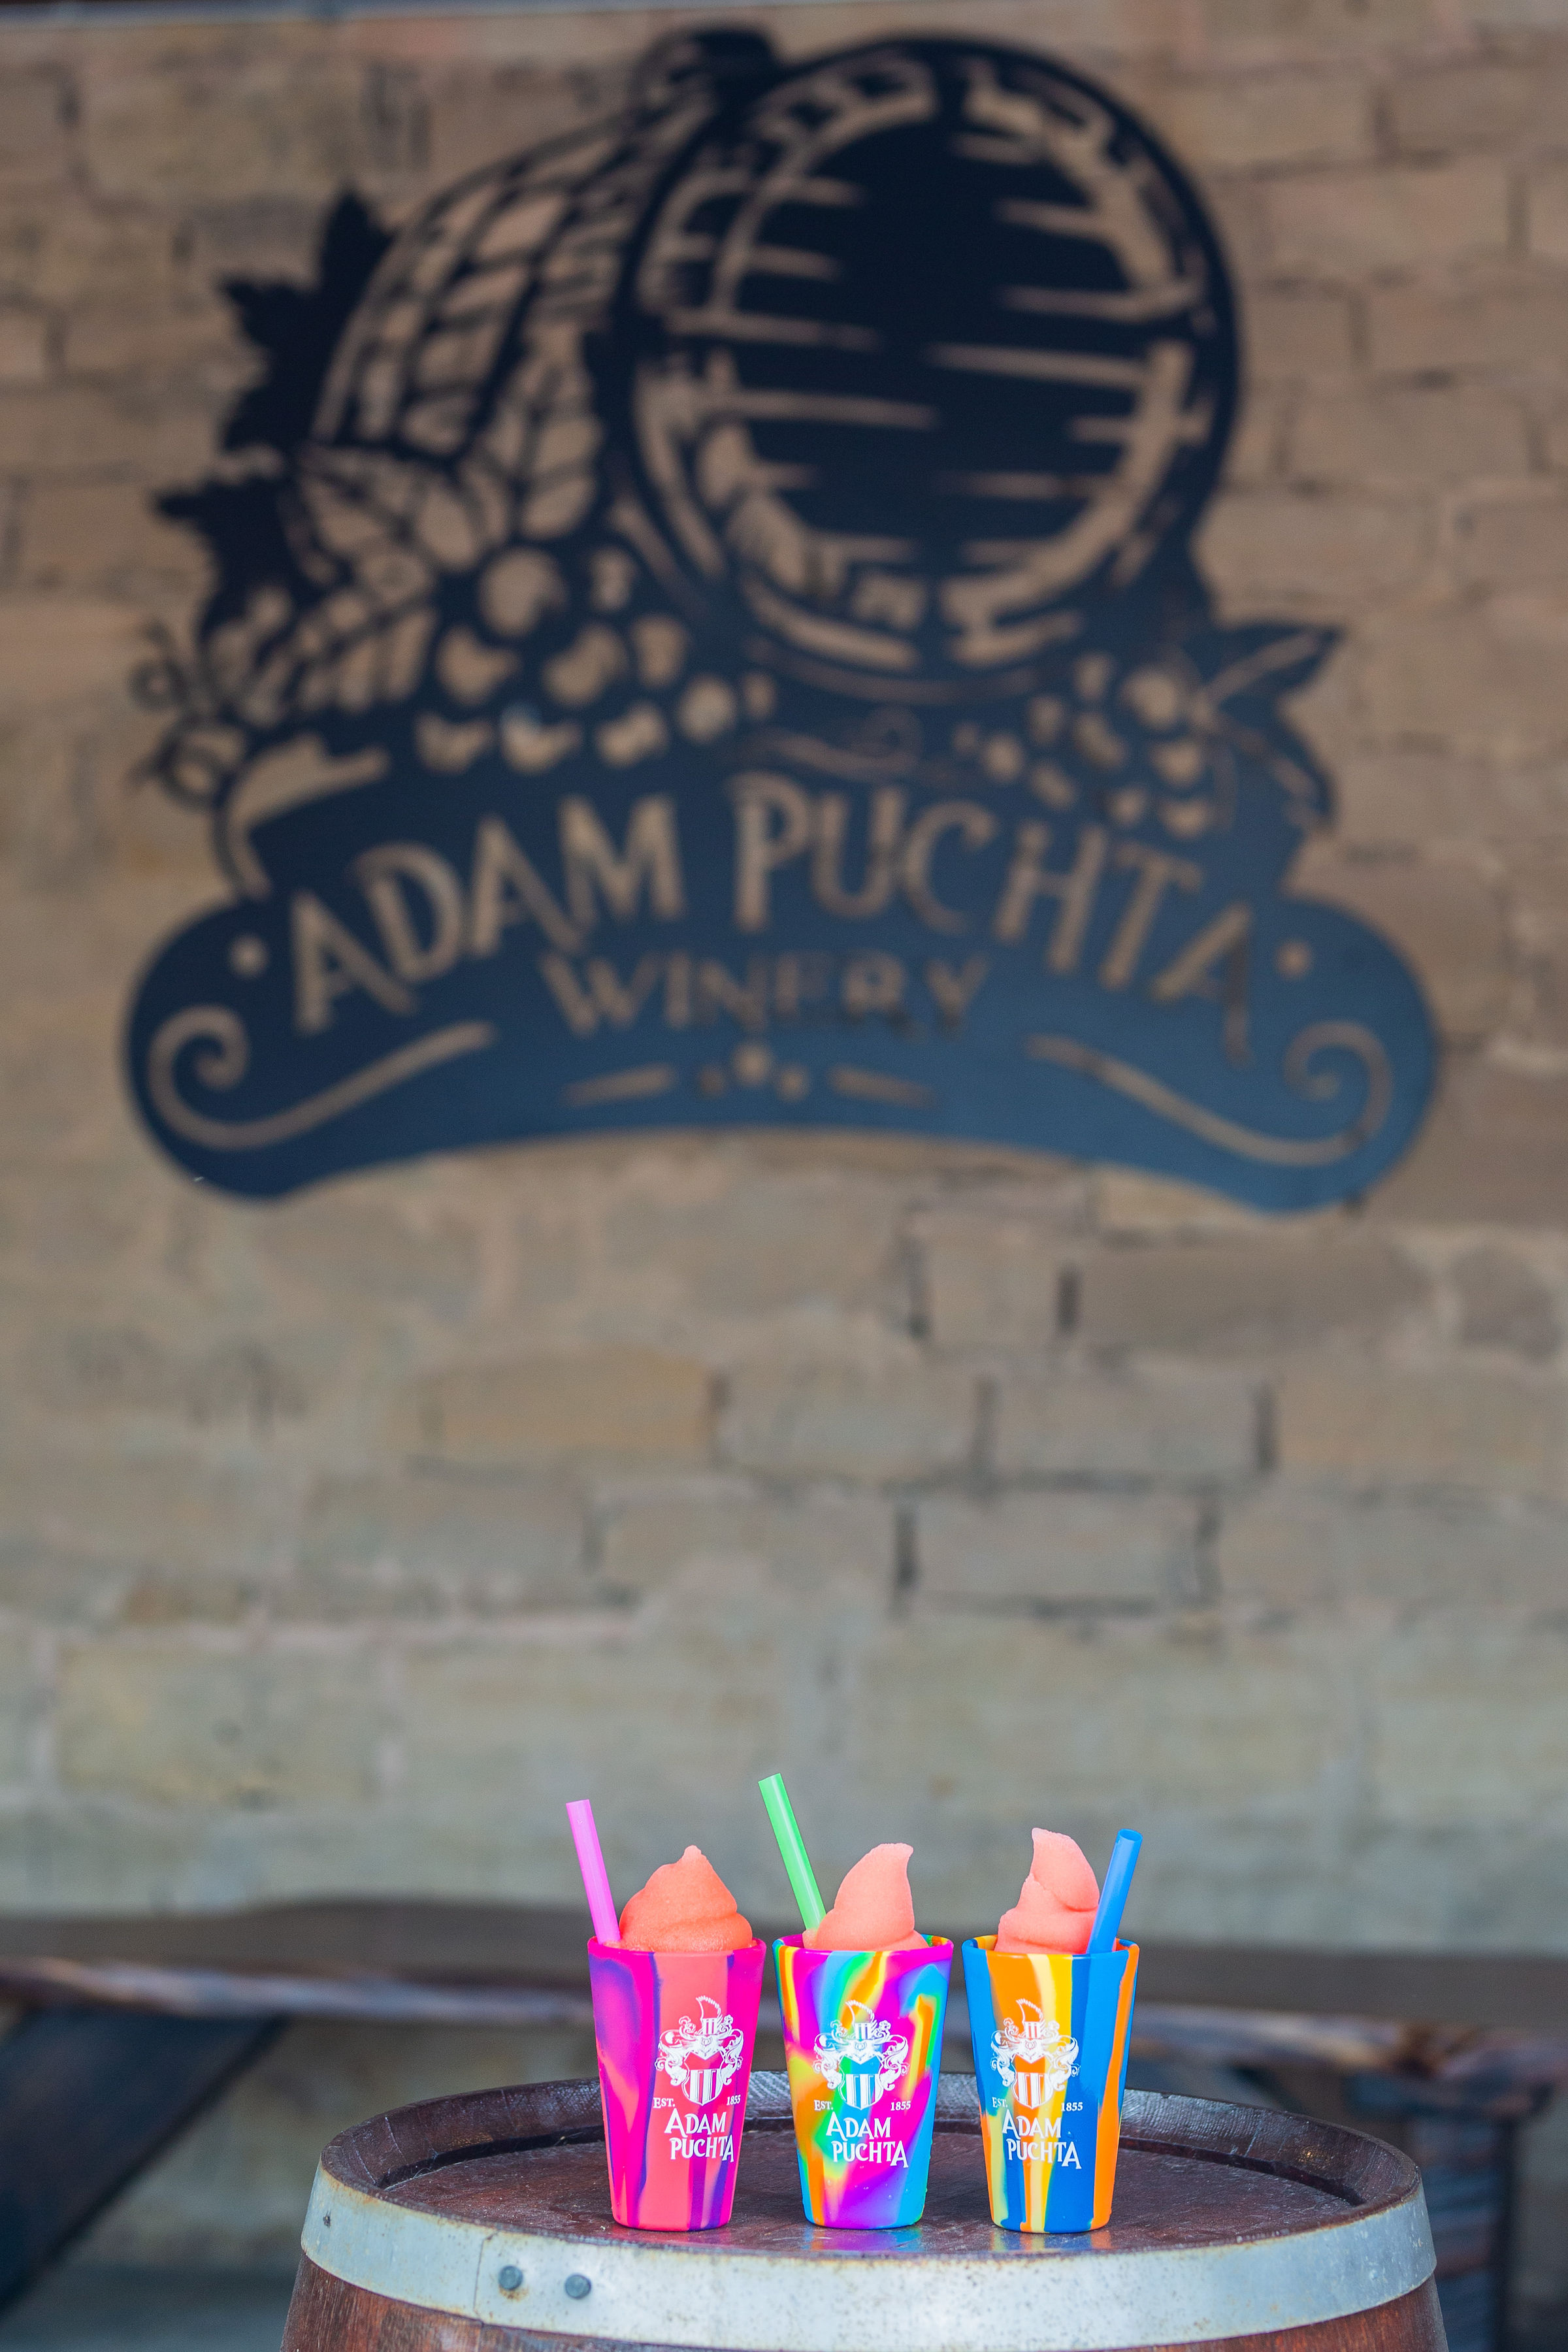 Adam Puchta Winery- Three red icees in rainbow cups in from of the winery's sign.